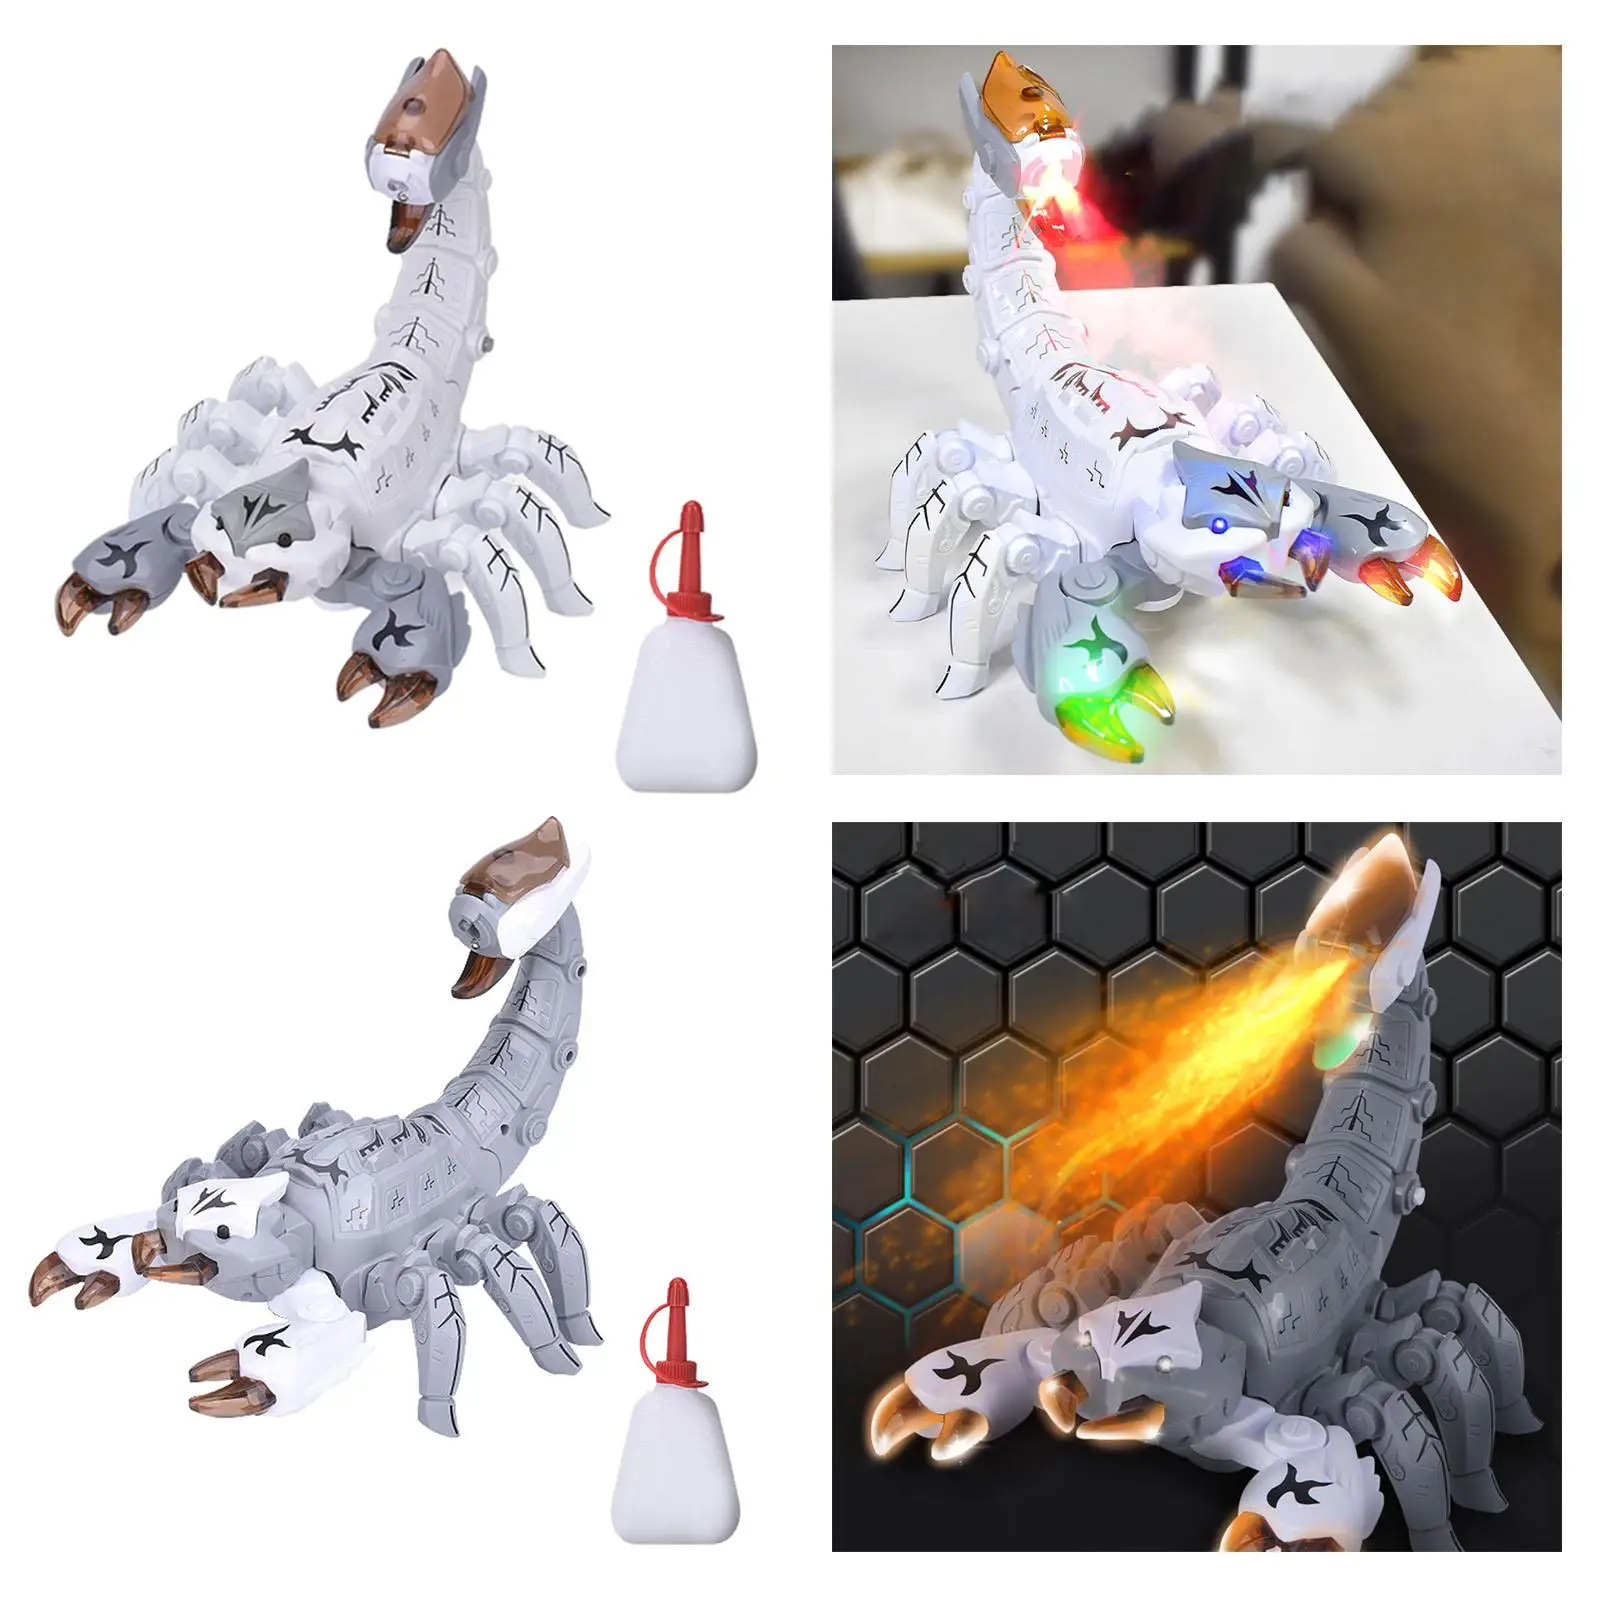 Realistic Scorpion Toy Spray Smoke with LED Light and Music Moving Joints for Boys Girls Simulation Animal Model Robot Toy